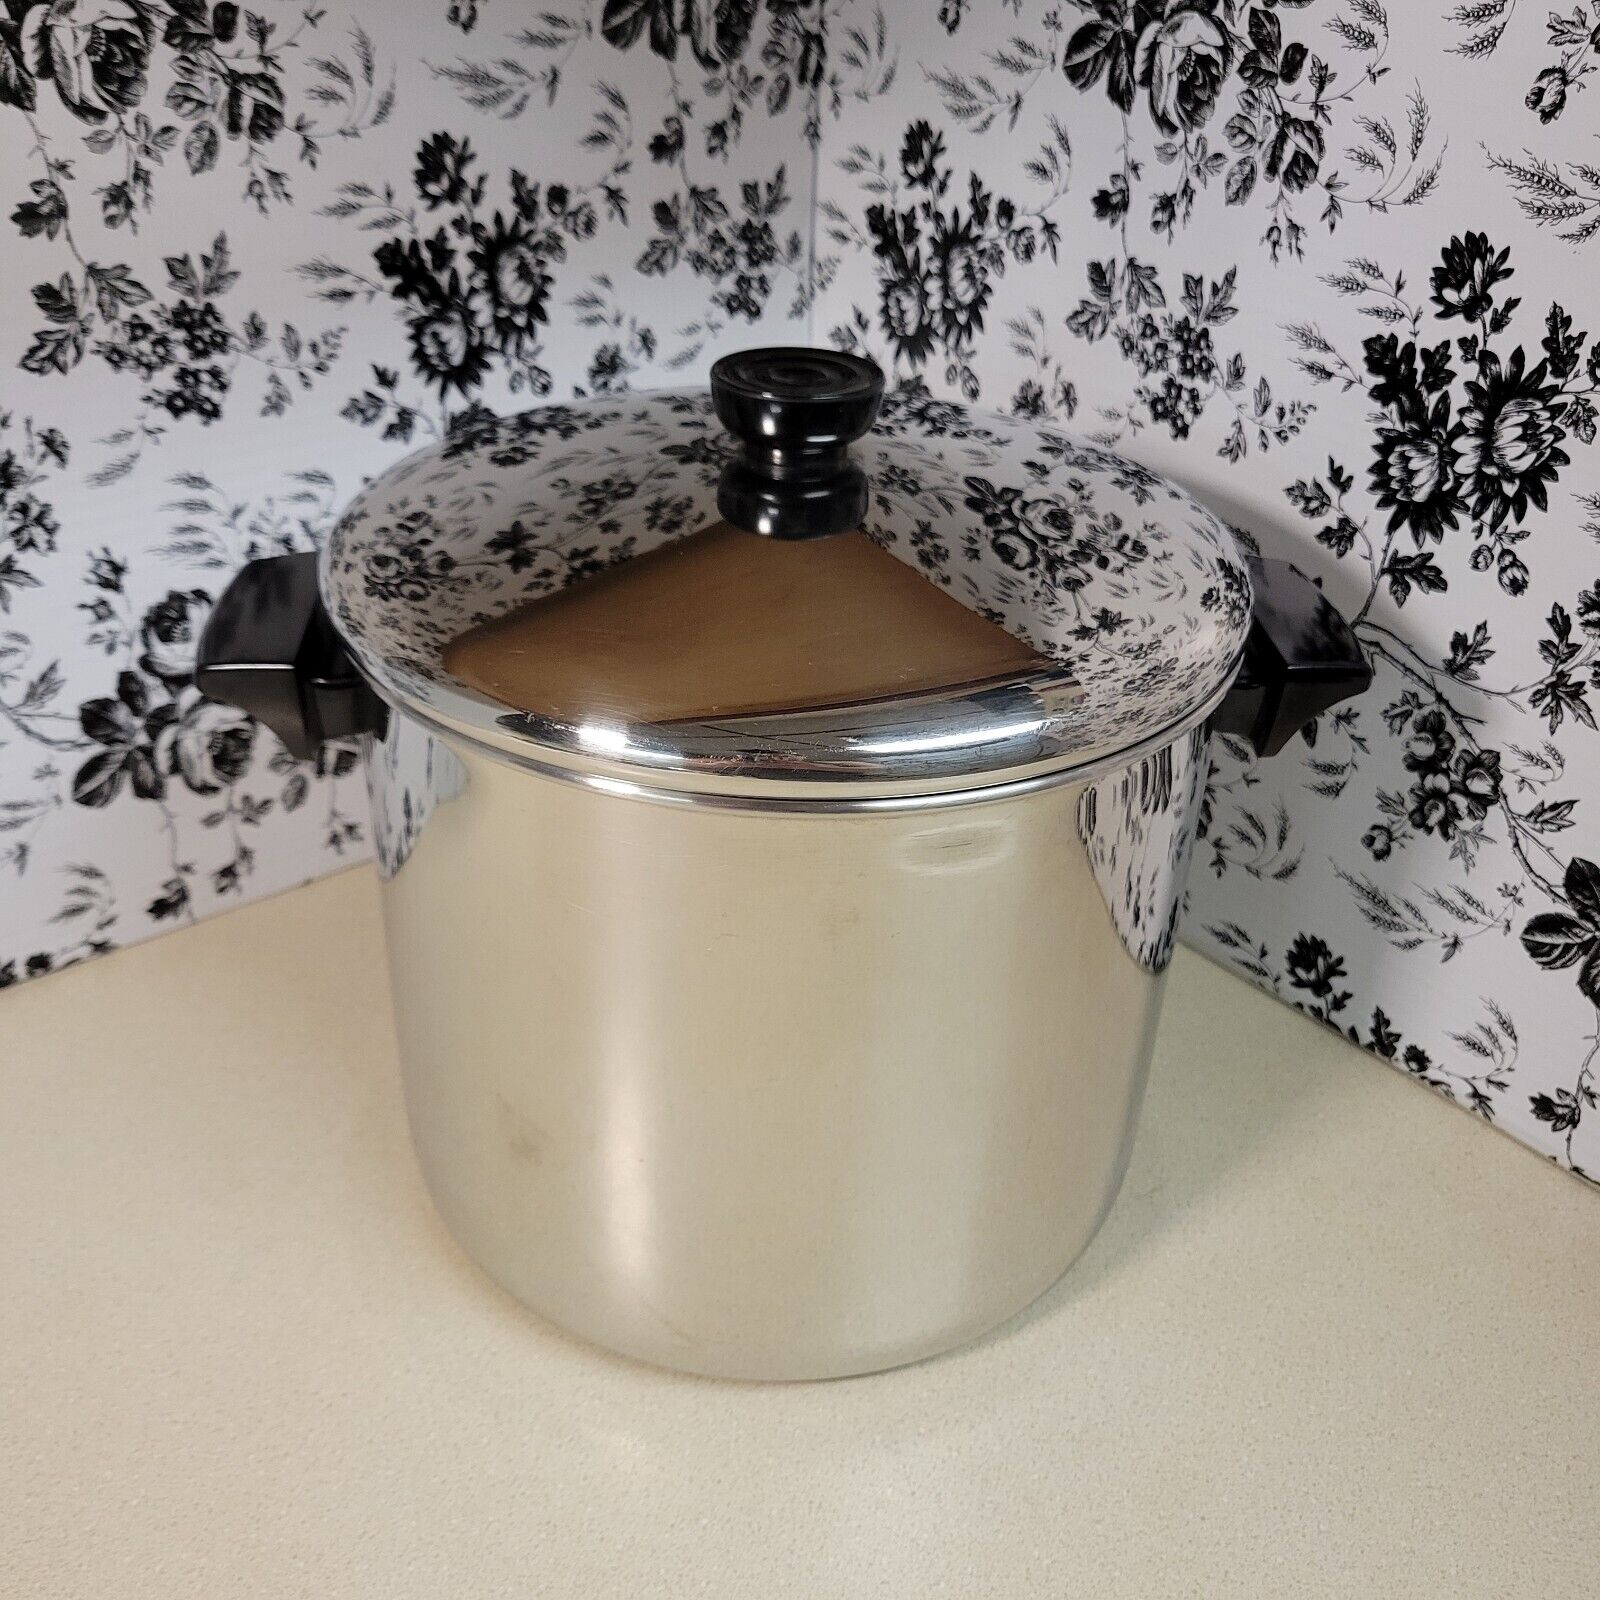 Revere Ware 8 Quart Stock Pot Stainless Steel Clad Tri Ply With Lid Vintage